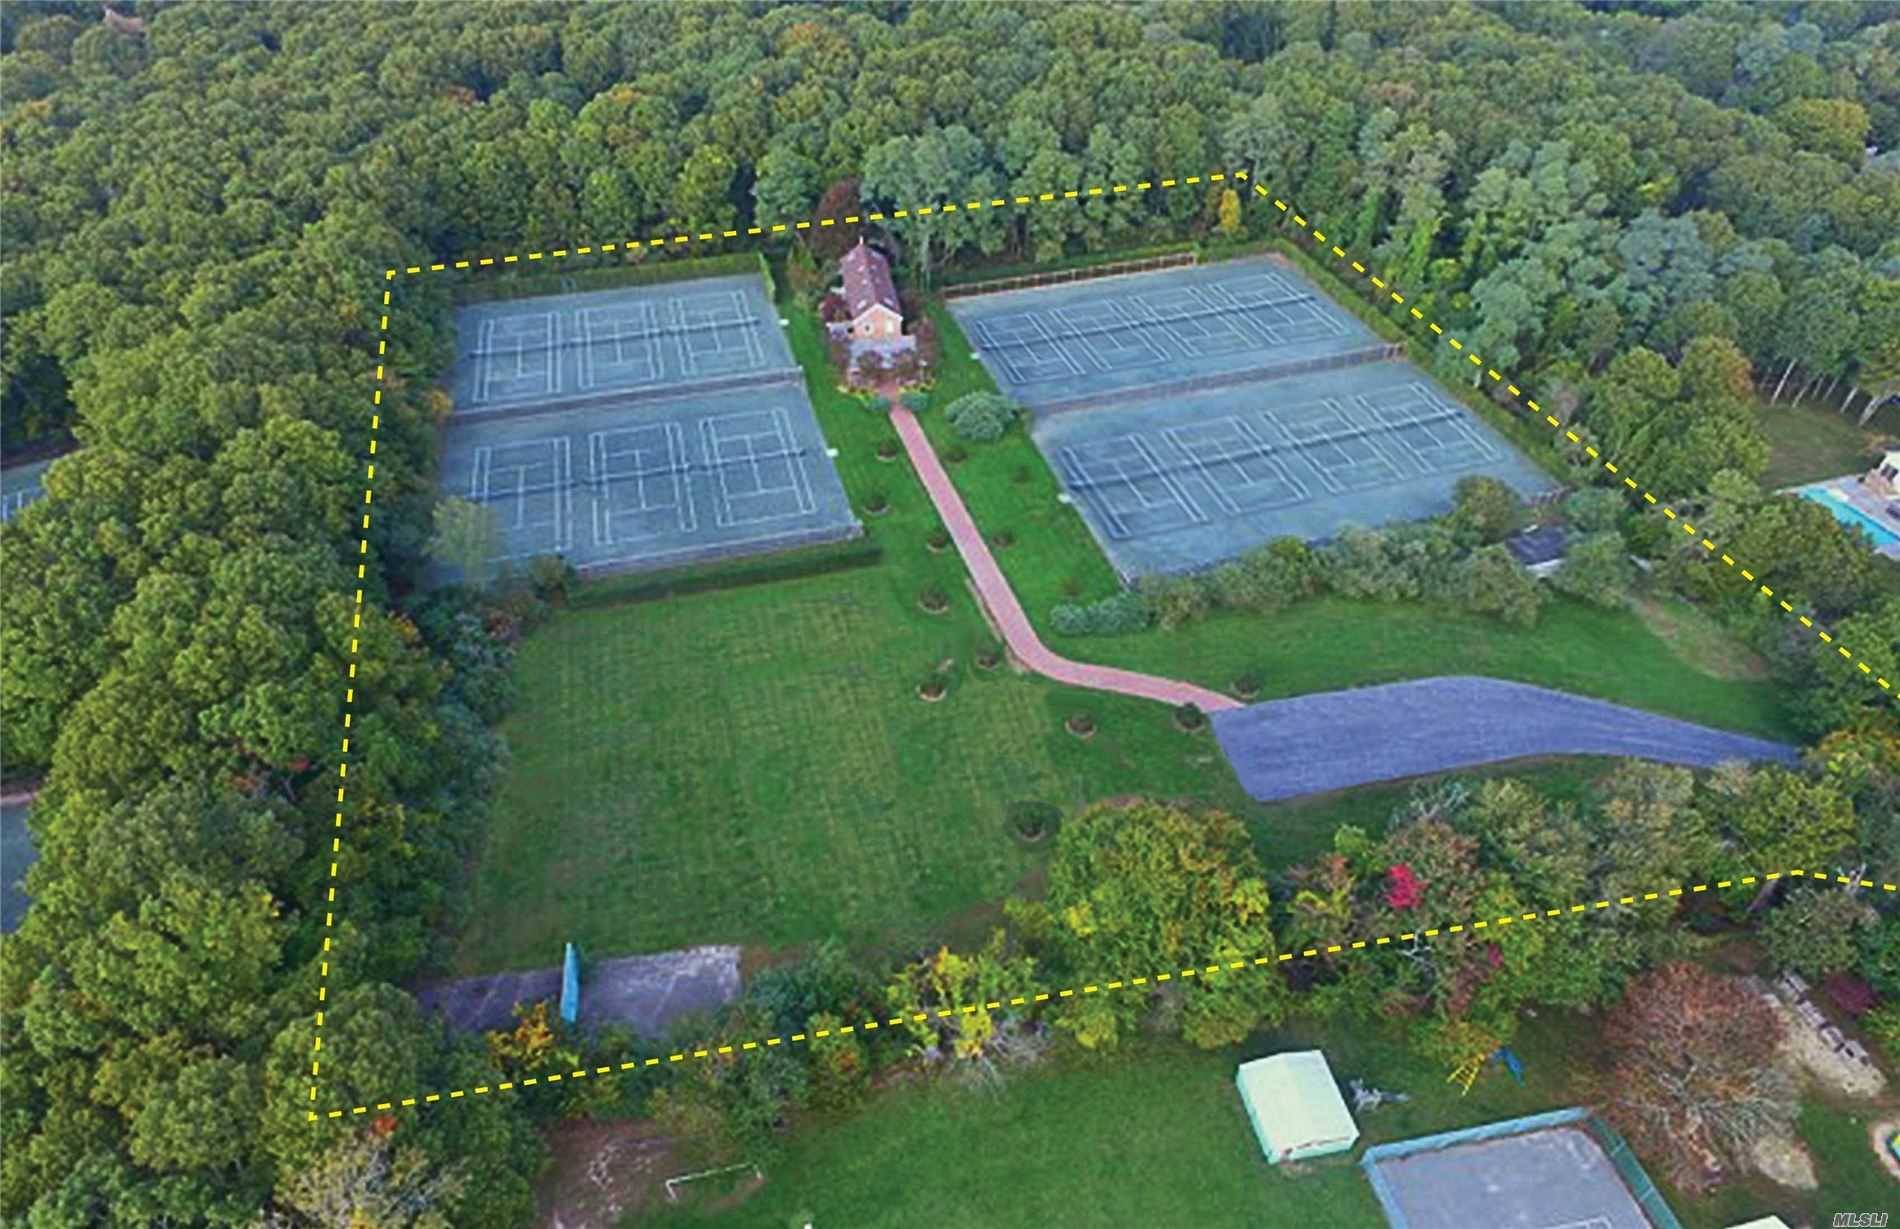 Great opportunity... 5 Acres of lush land in an upscale, thriving community in the heart of Southampton.